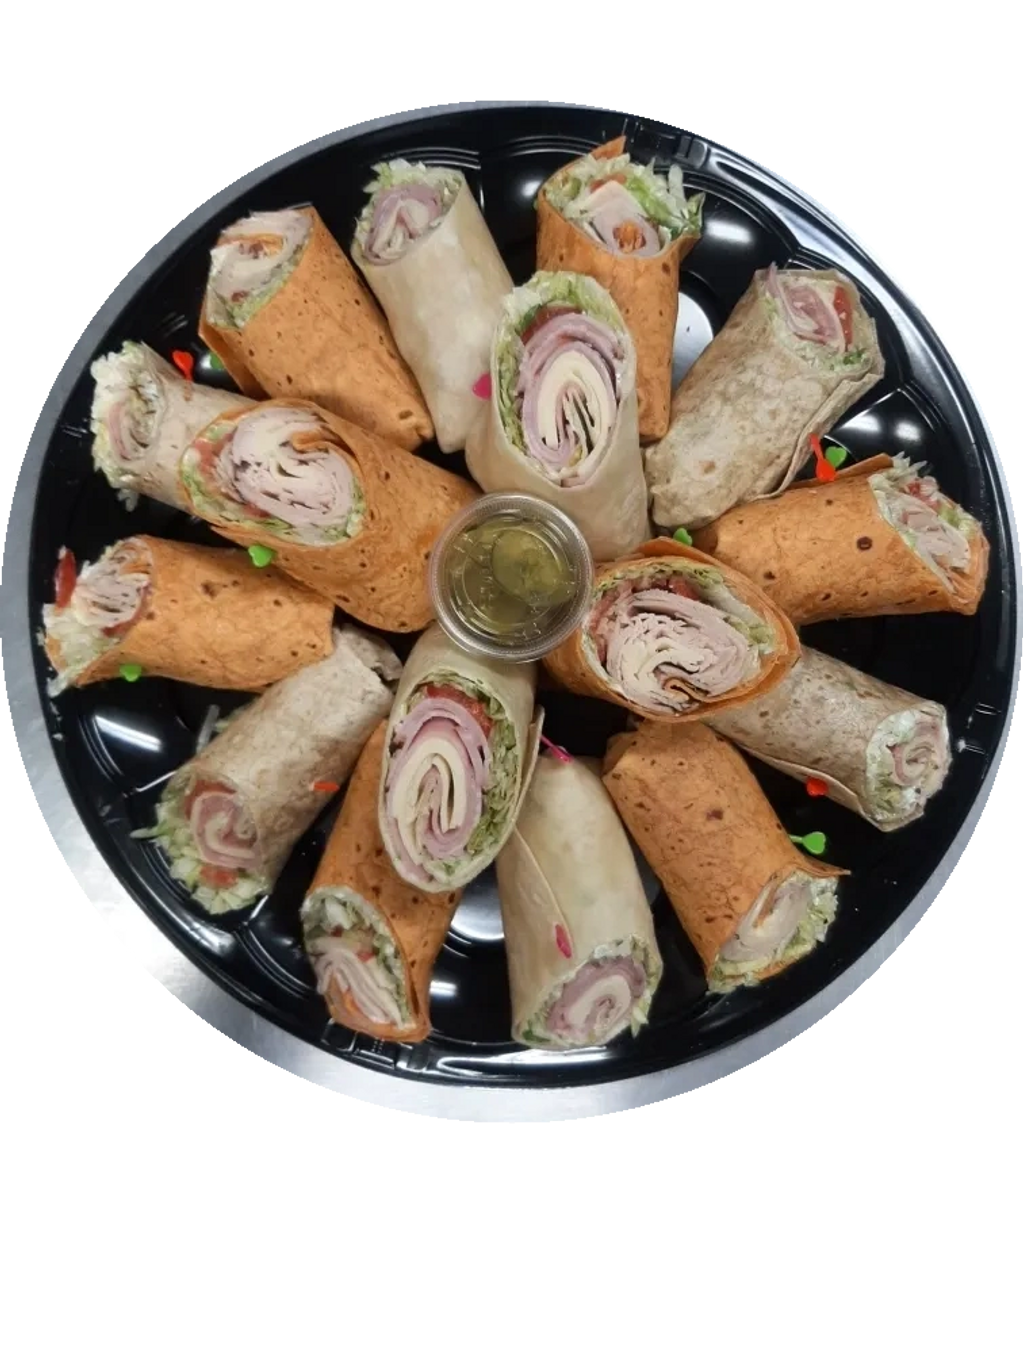 Wrap platter, serves 8 to 10 people, $50